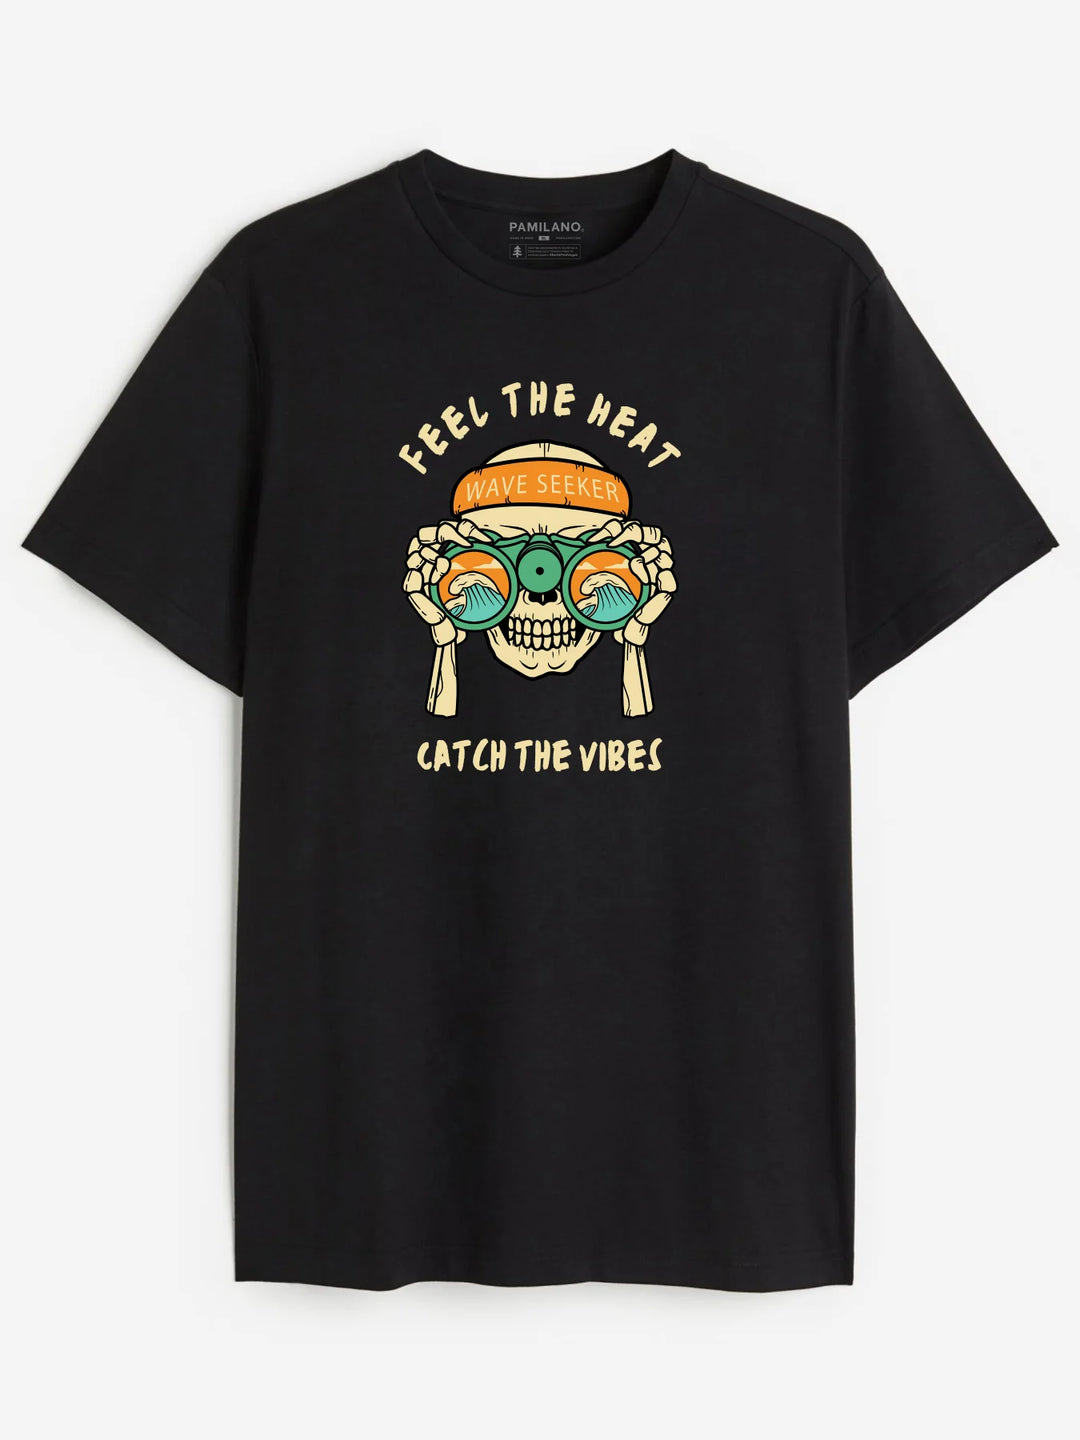 Feel The Heat Catch The Vibe - Unisex T-Shirt